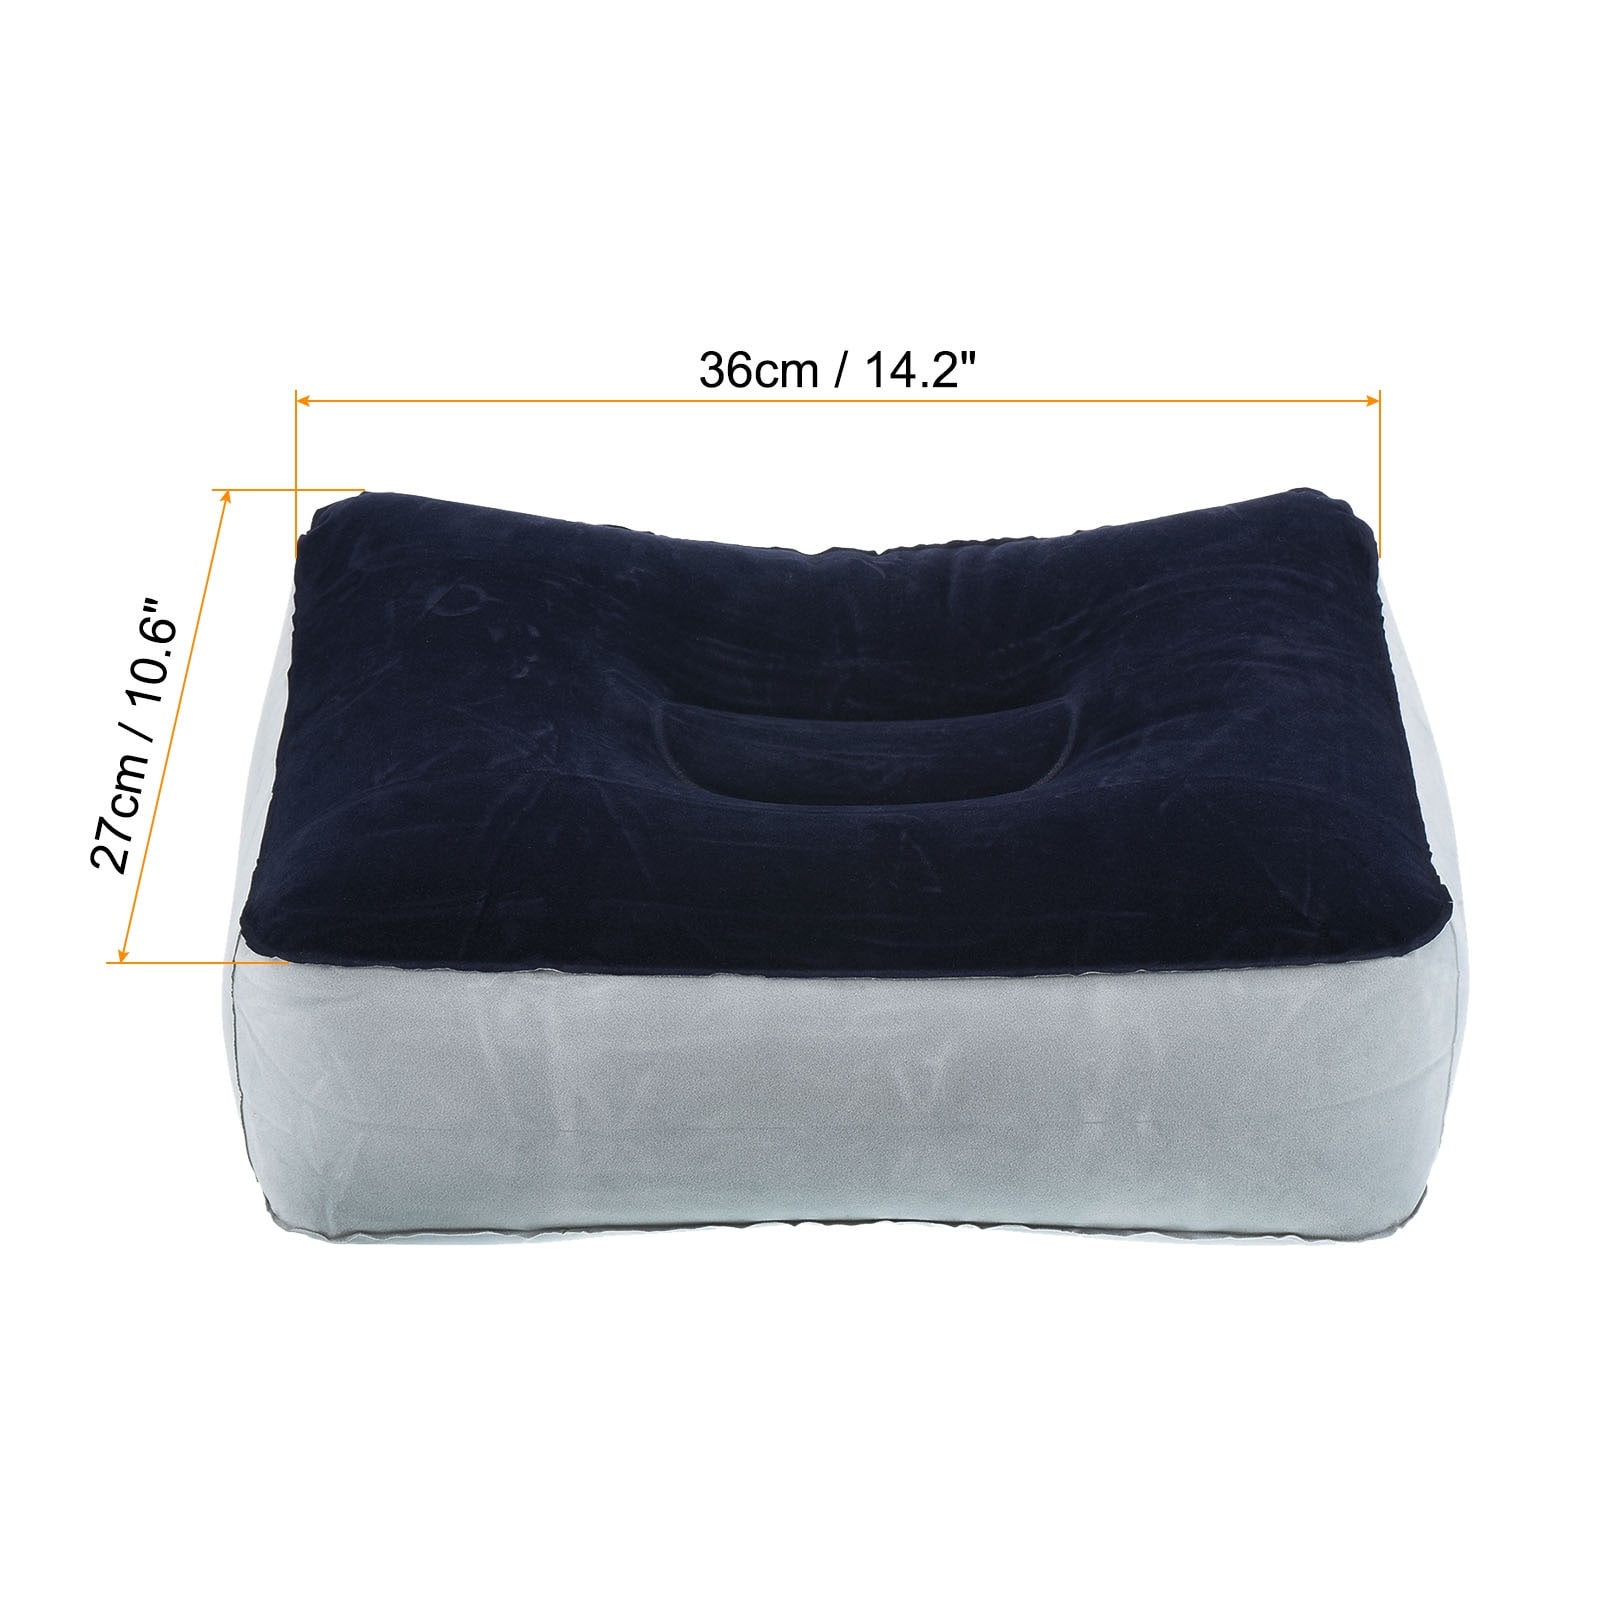 https://ak1.ostkcdn.com/images/products/is/images/direct/277d9a33fe5824e023944d04520942f414f1f210/Travel-Foot-Rest-Pillow%2C-Inflatable-Foot-Rest-Mat-Leg-Rest-Pillow%2C-Gray-Blue.jpg